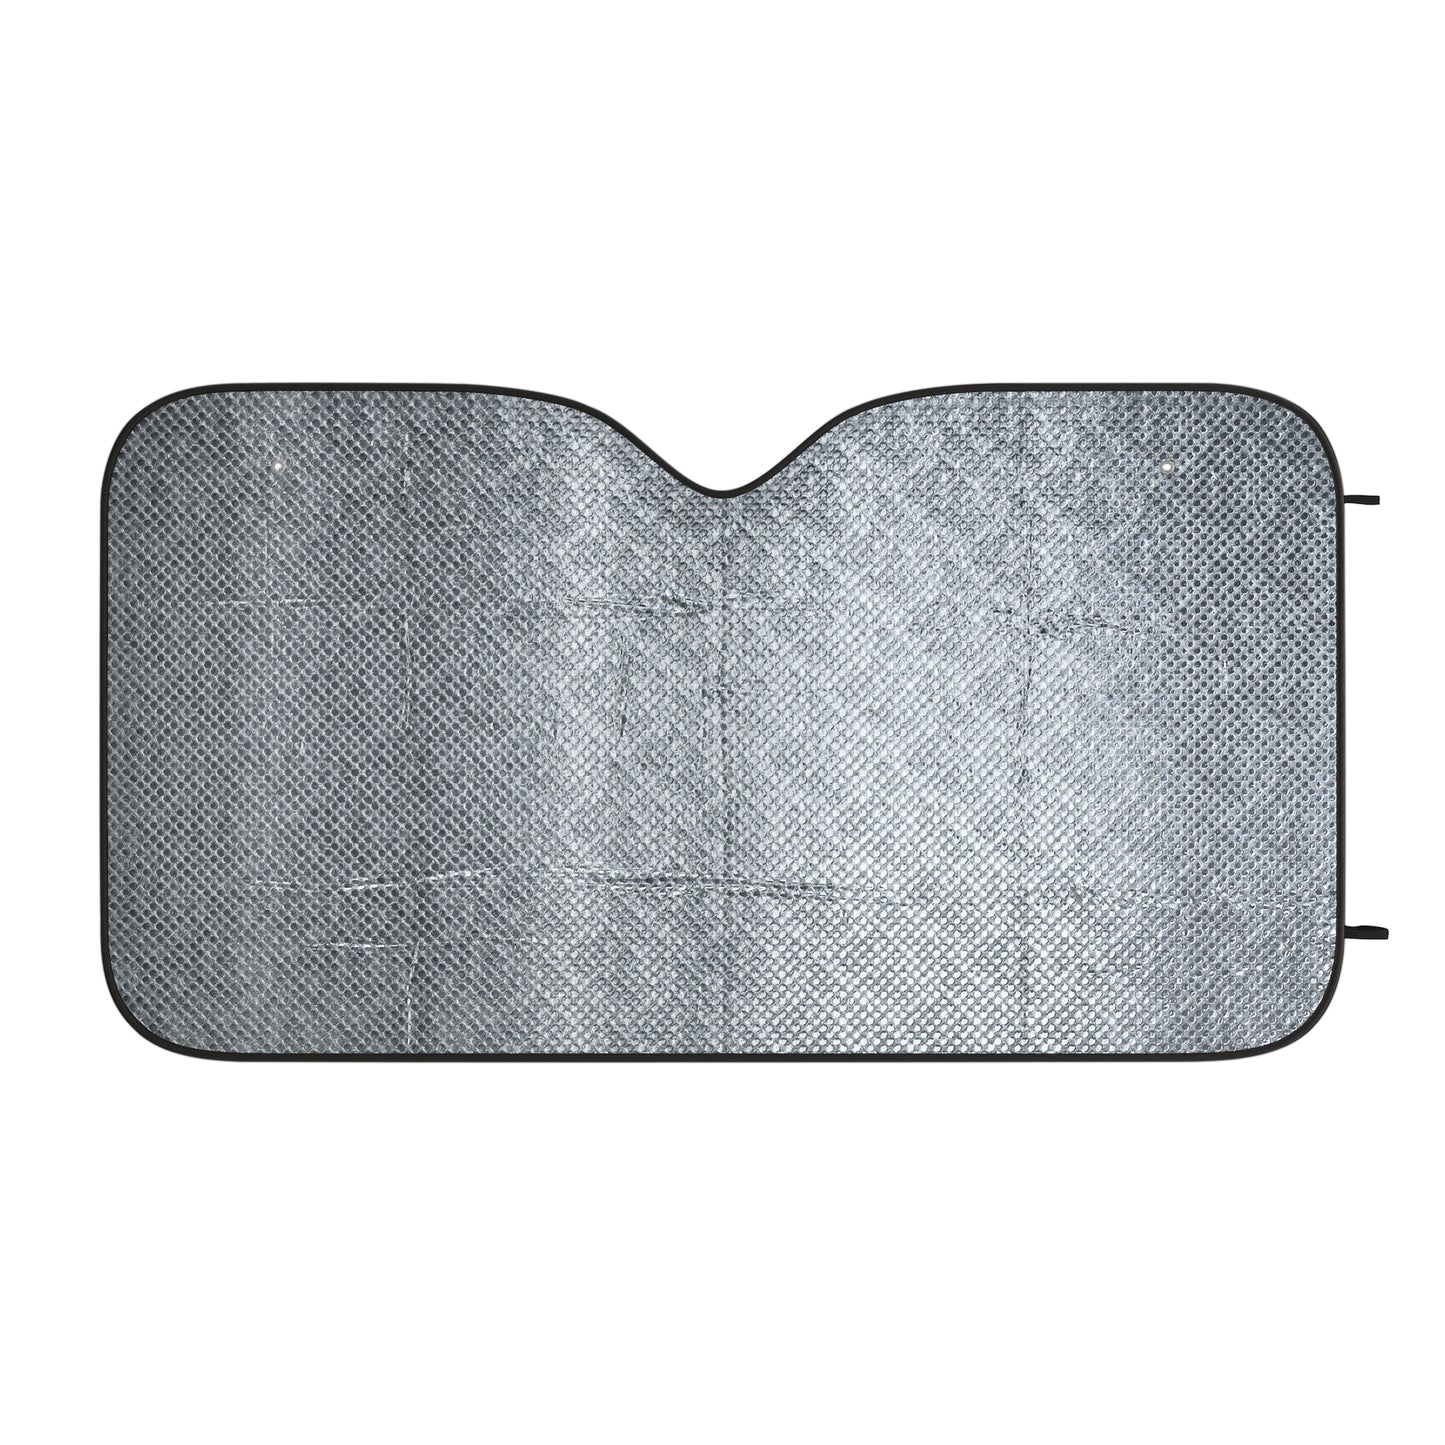 Custom Car Sun Shades Personalized Car Accessories Van Truck Auto Parts Decor New Car Gifts Promotional Marketing Products